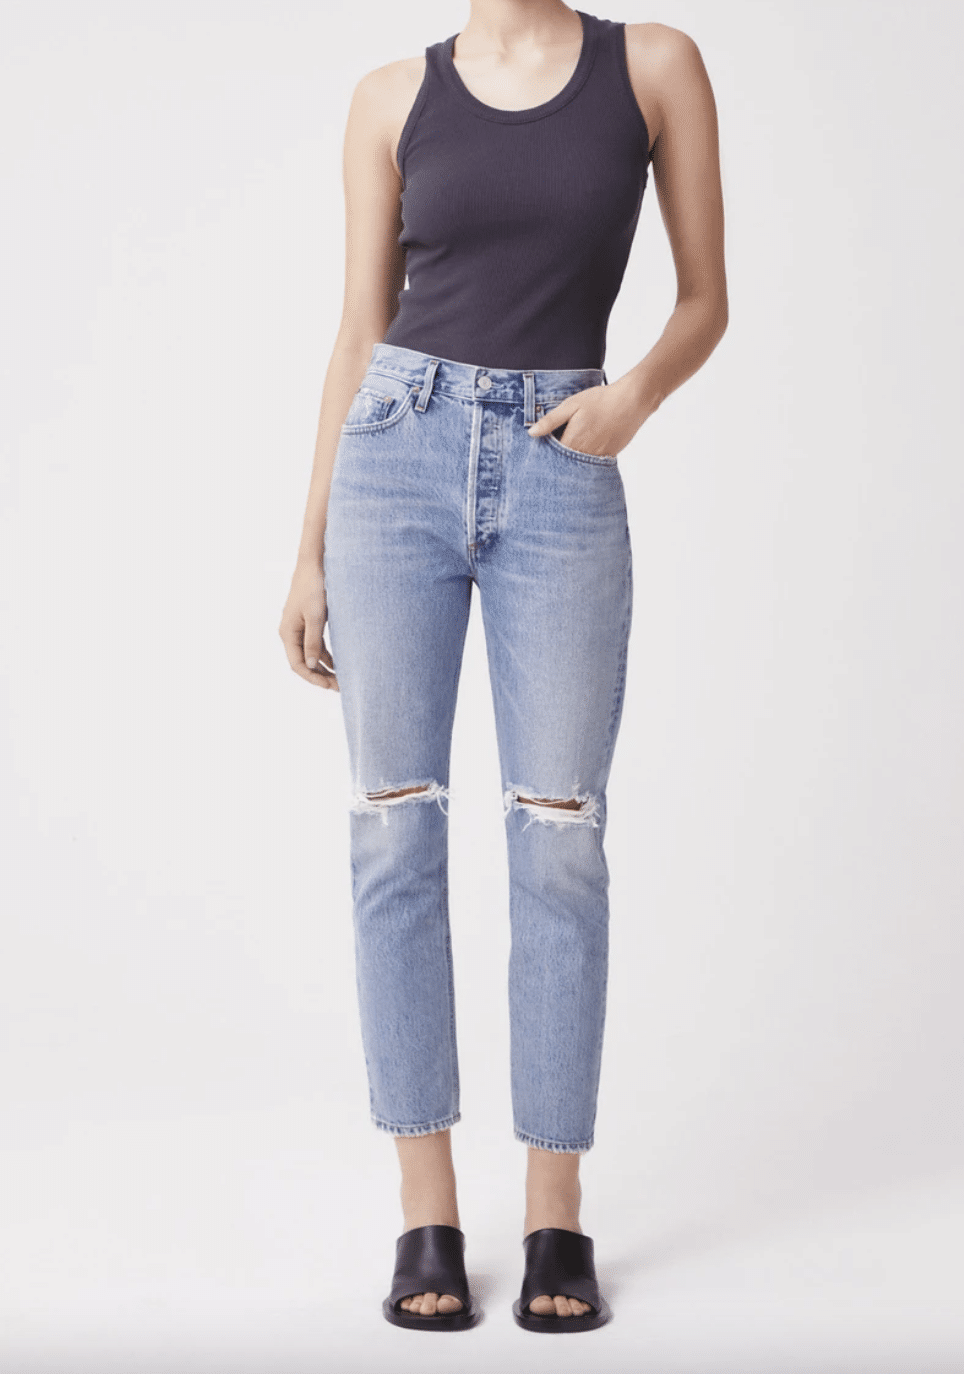 Agolde jeans, by Blogger What The Fab